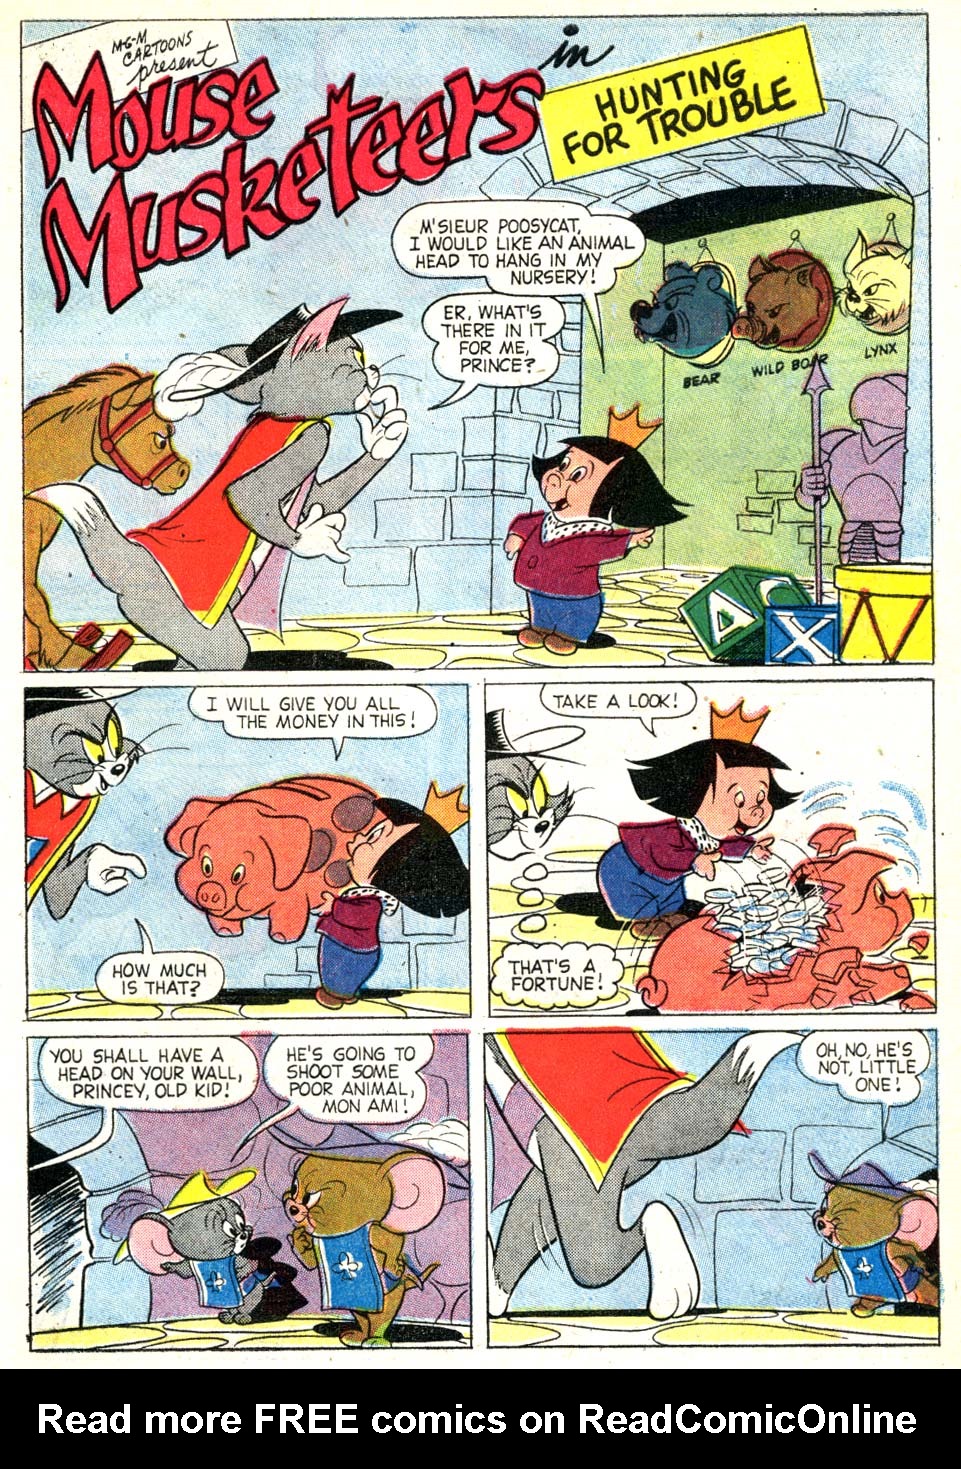 Read online M.G.M's The Mouse Musketeers comic -  Issue #14 - 27